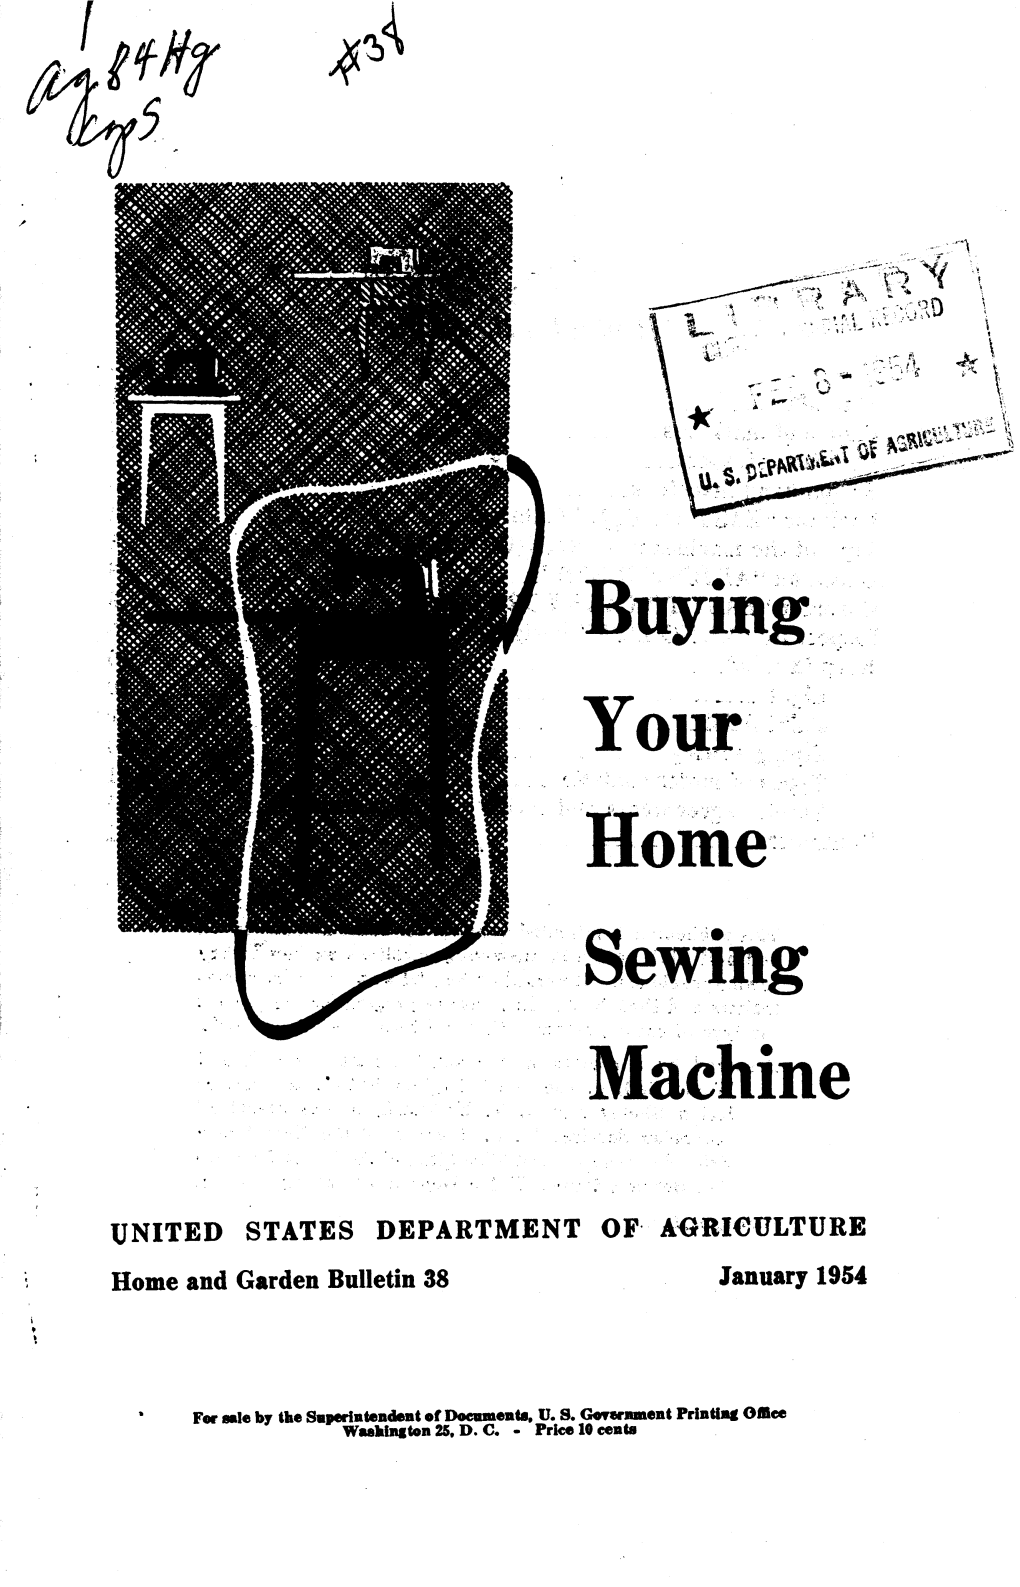 Your Home Sewing Machine